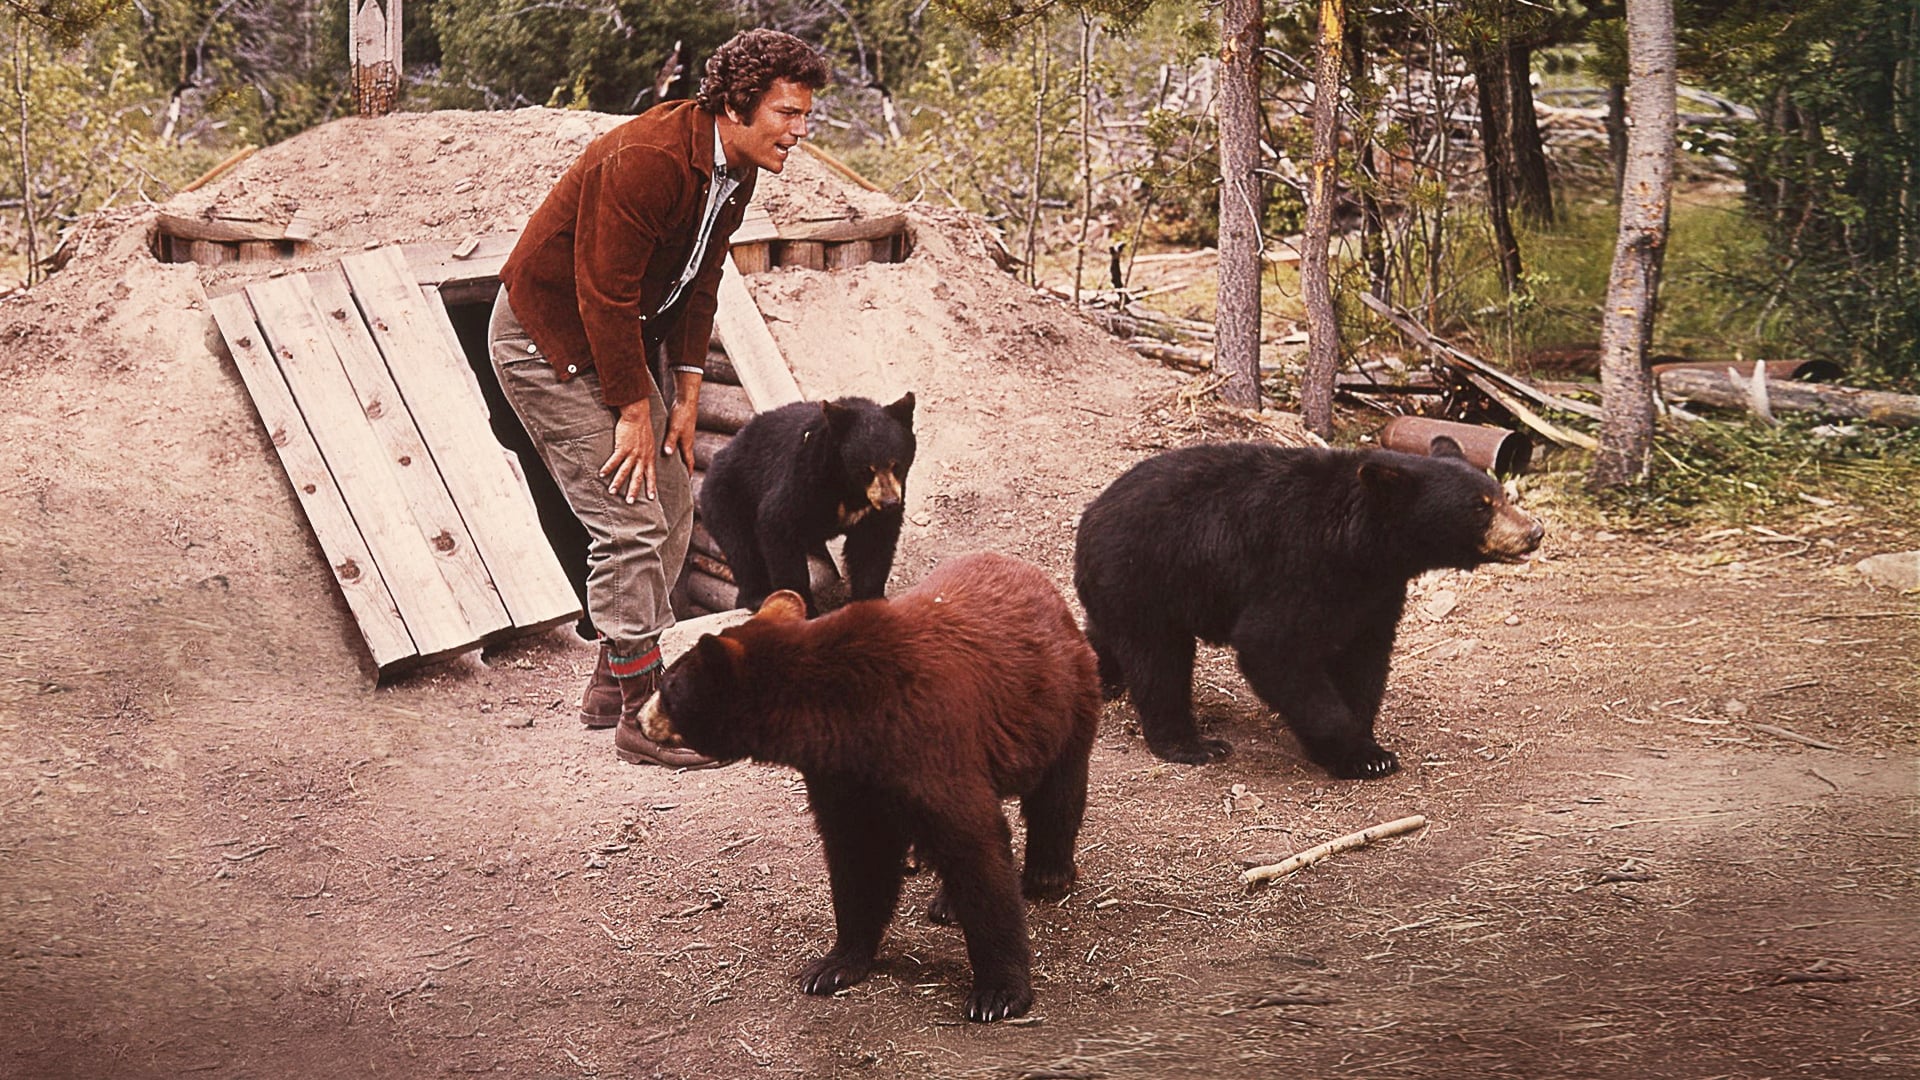 The Bears and I (1974)